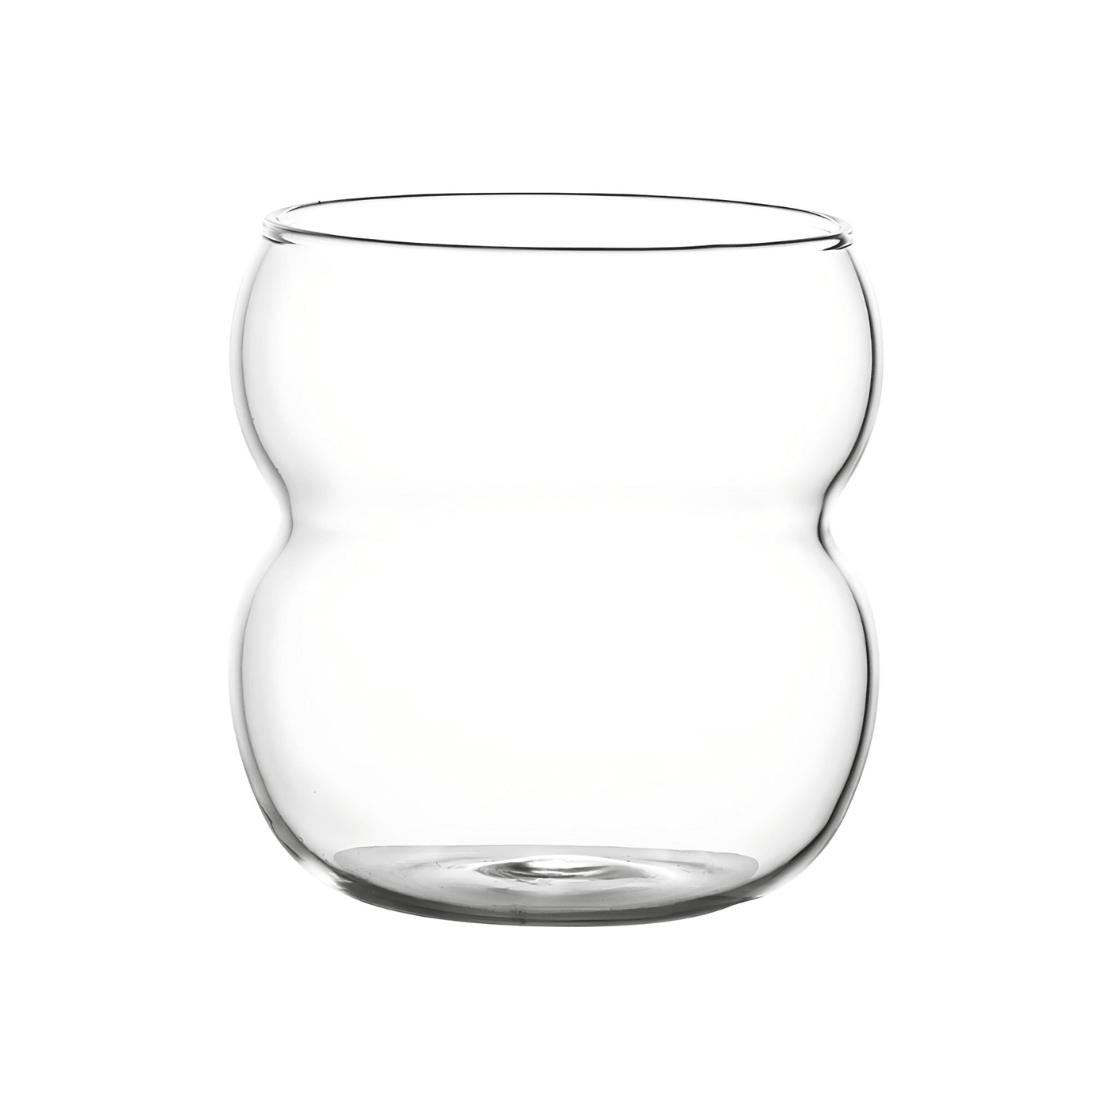 Double bubble drinking glass